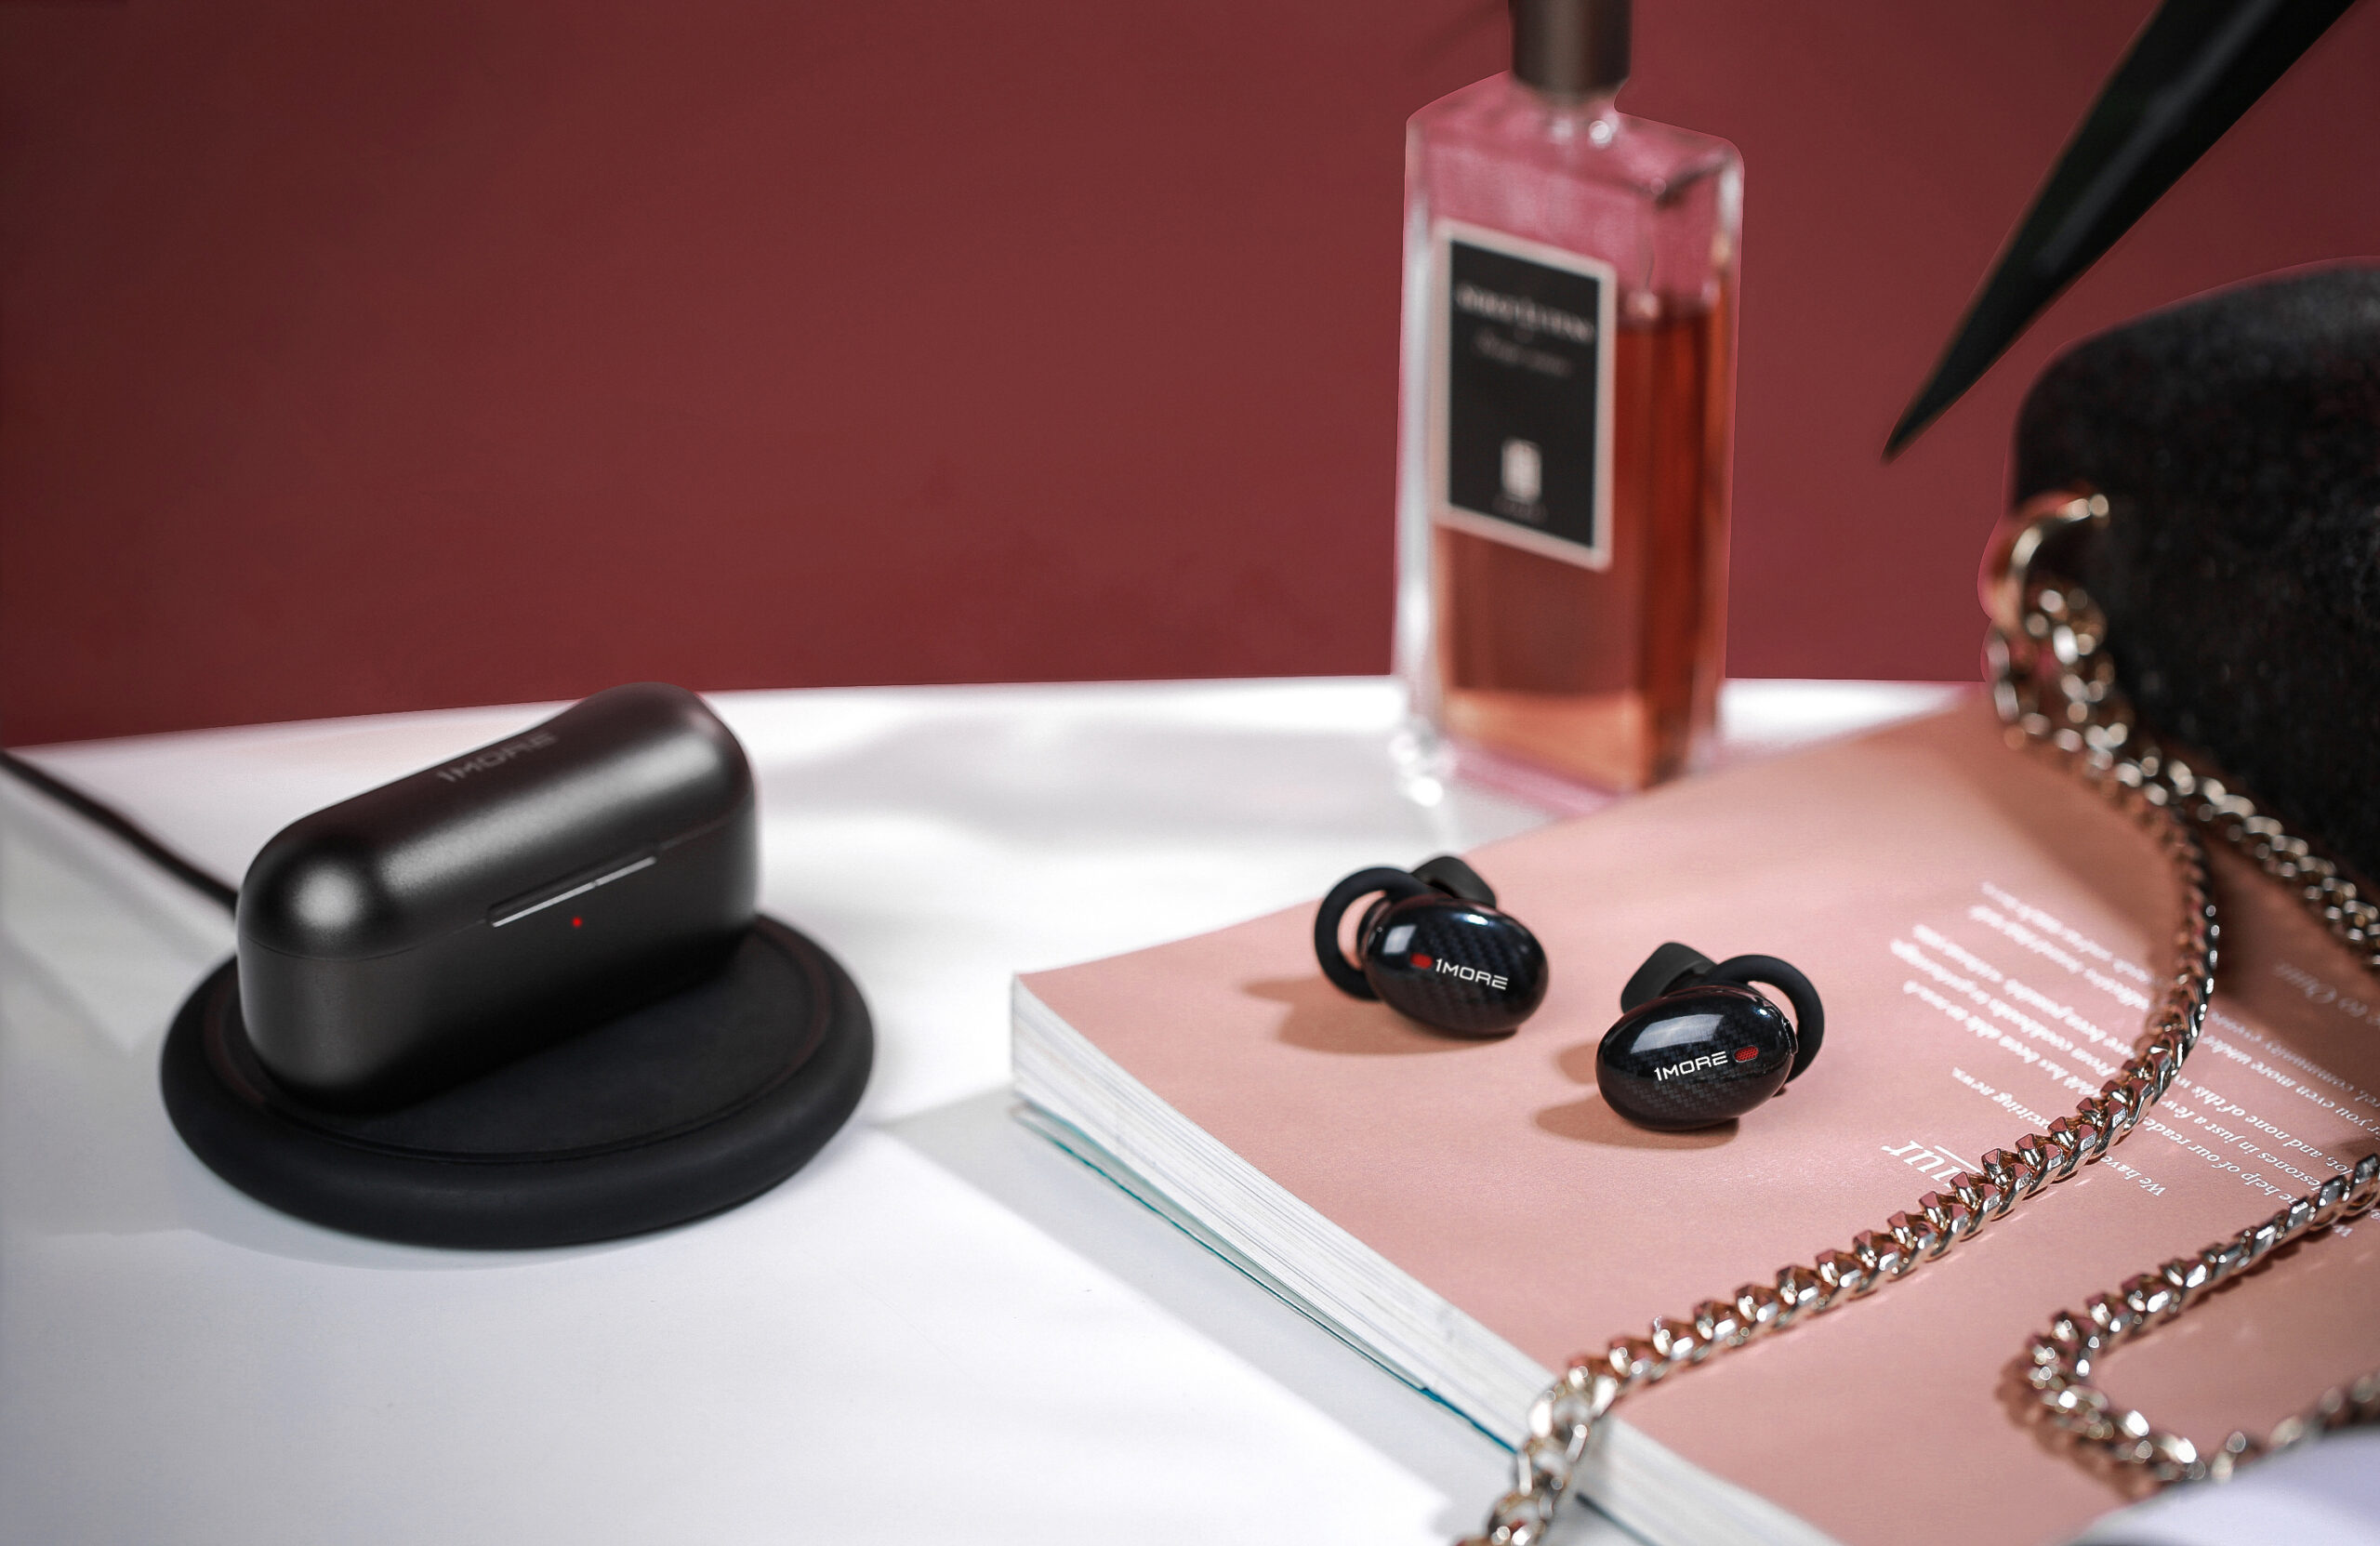 1MORE's true wireless ANC headphones on a table with perfume, notebook and purse